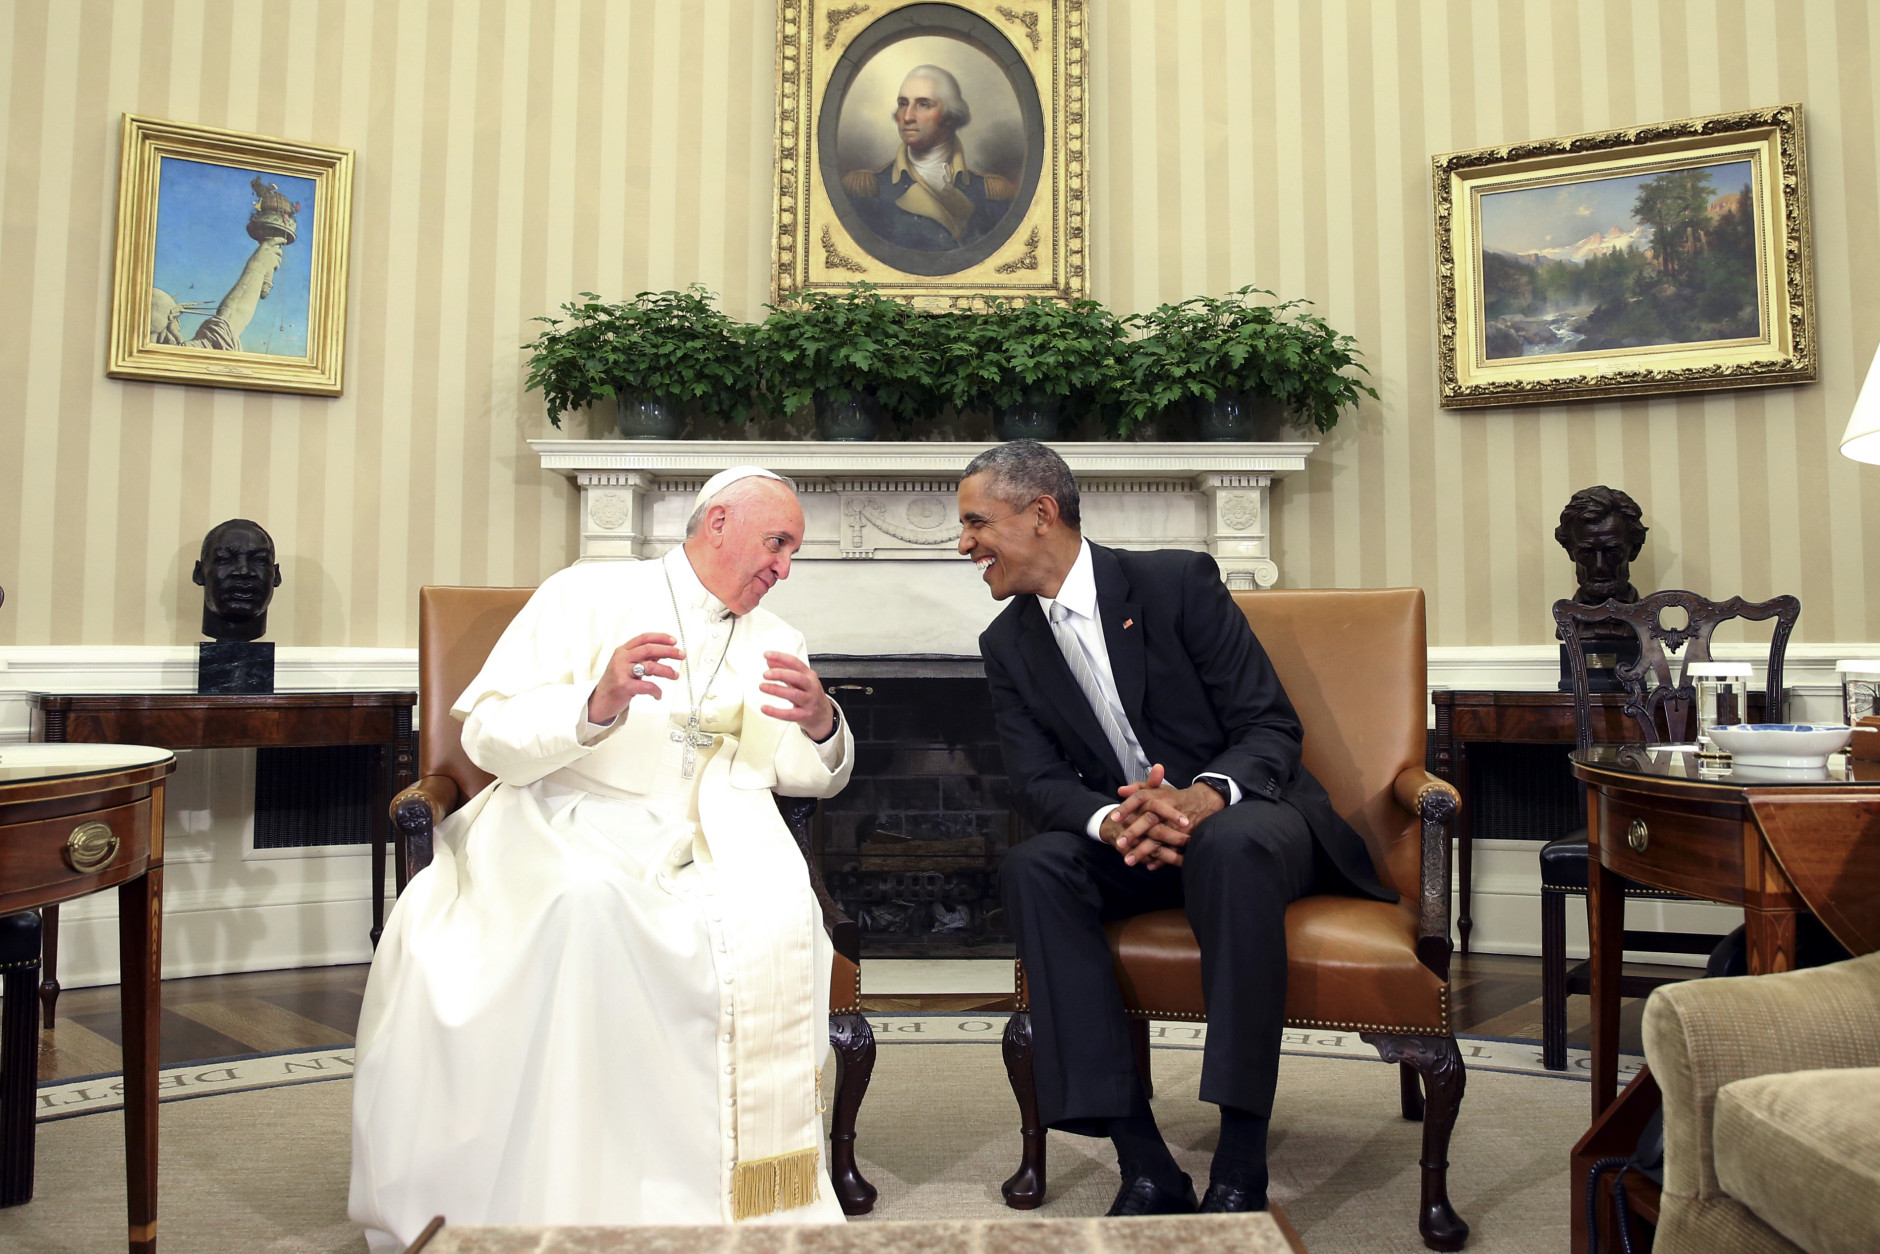 President Barack Obama talks with Pope Francis in the Oval Office of the White House in Washington, Wednesday, Sept. 23, 2015. (AP Photo/Andrew Harnik)